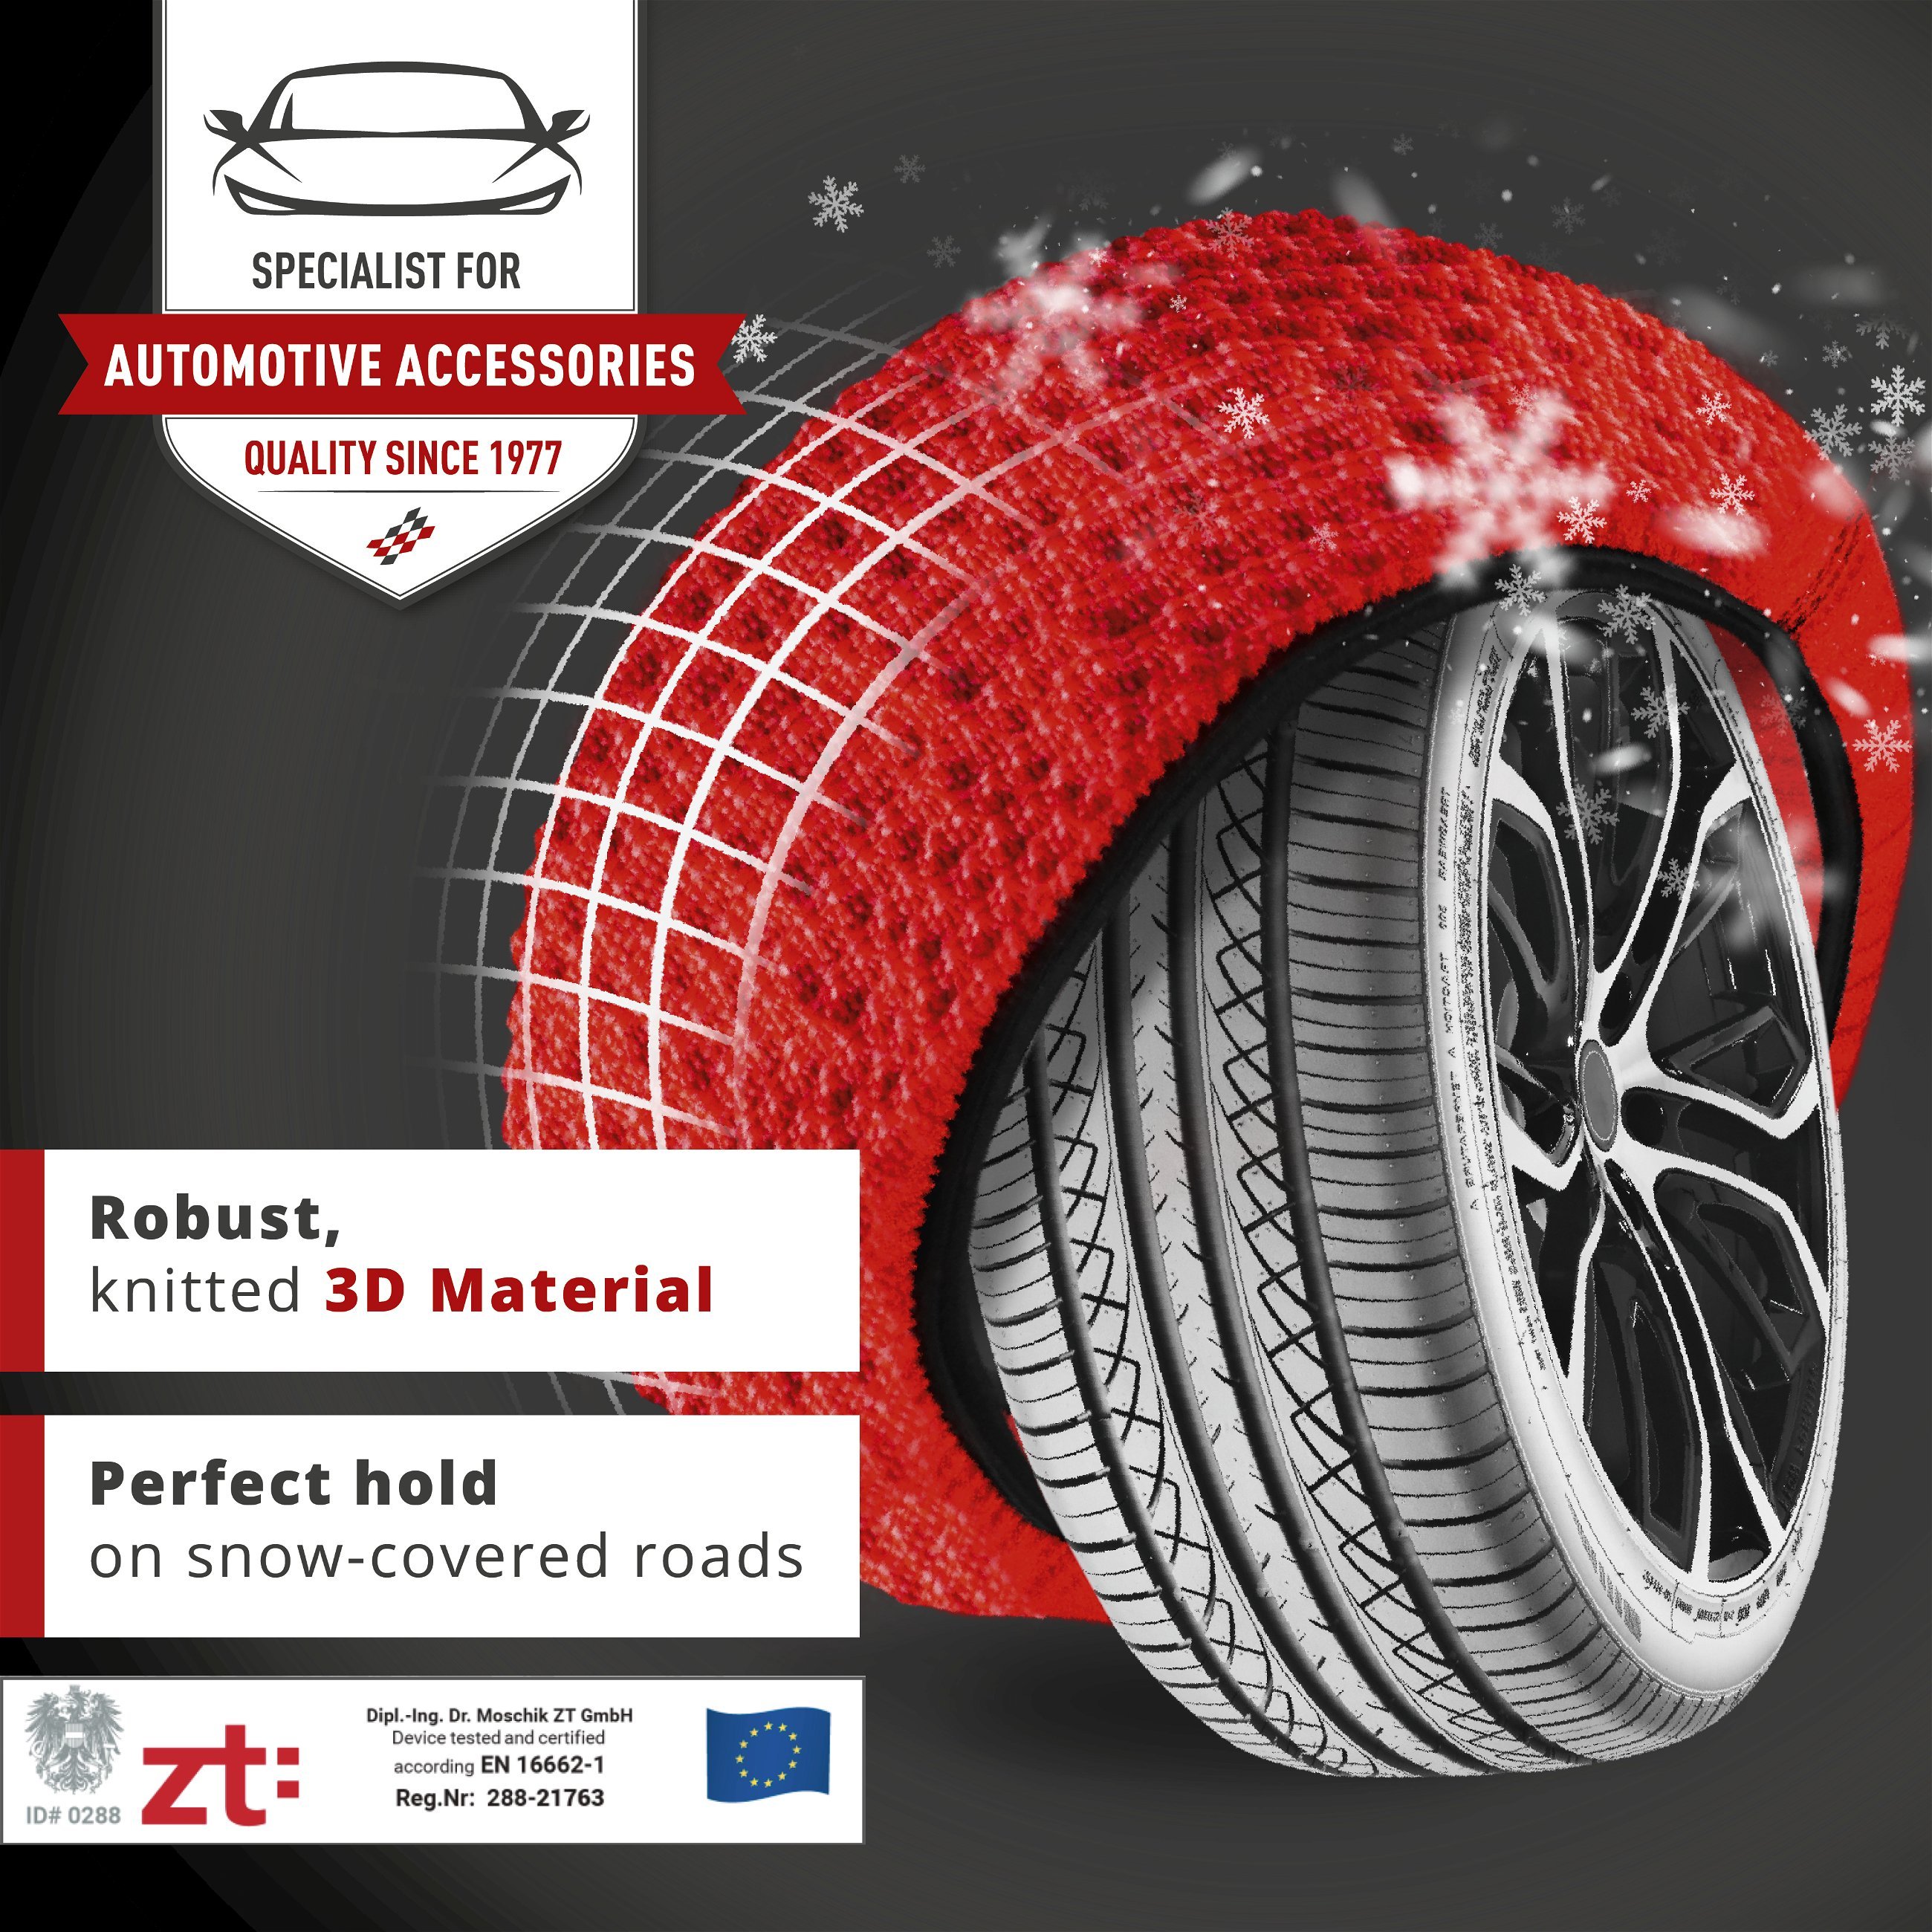 Basic Snow Chains Alternative Active XL, Textile Snow Chains, Snow Socks Set of 2 red